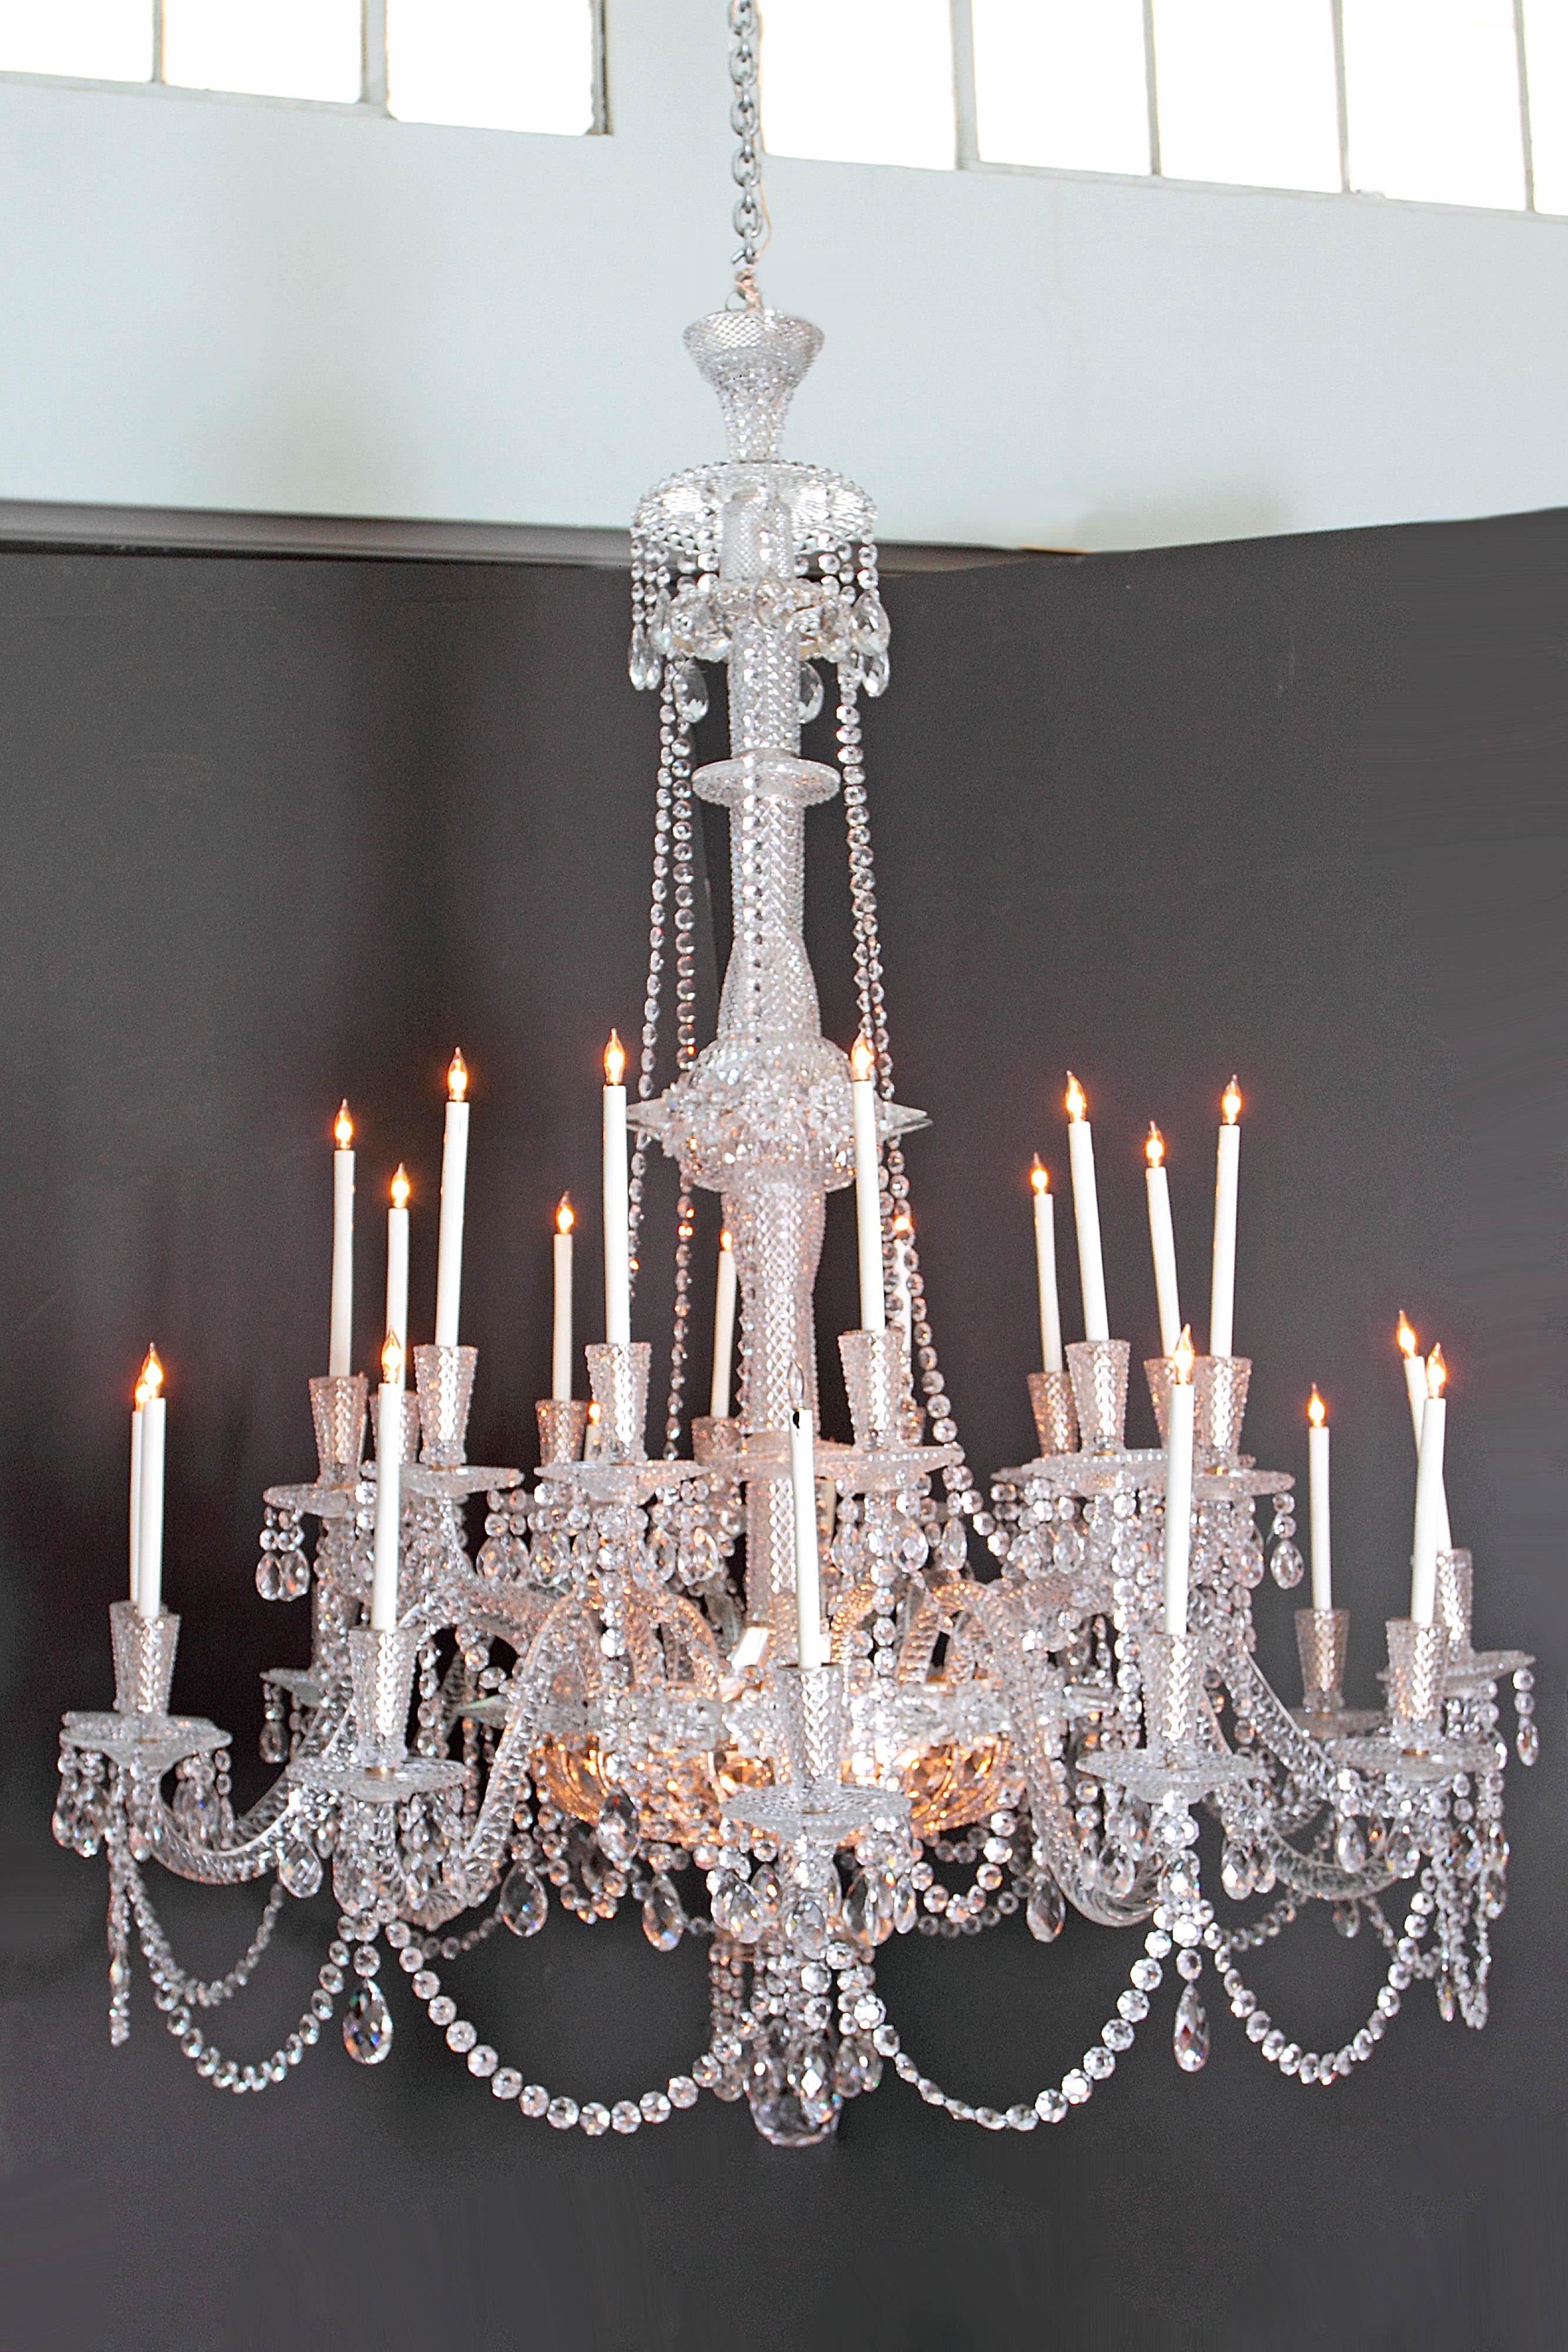 A pair of beautiful grand-scale and well-appointed glass and silver plate Georgian style / mid-Victorian chandeliers. 24 imposing candle arms each contain a single white taper. In the basket or bag at base are six lights or bulbs that light up the